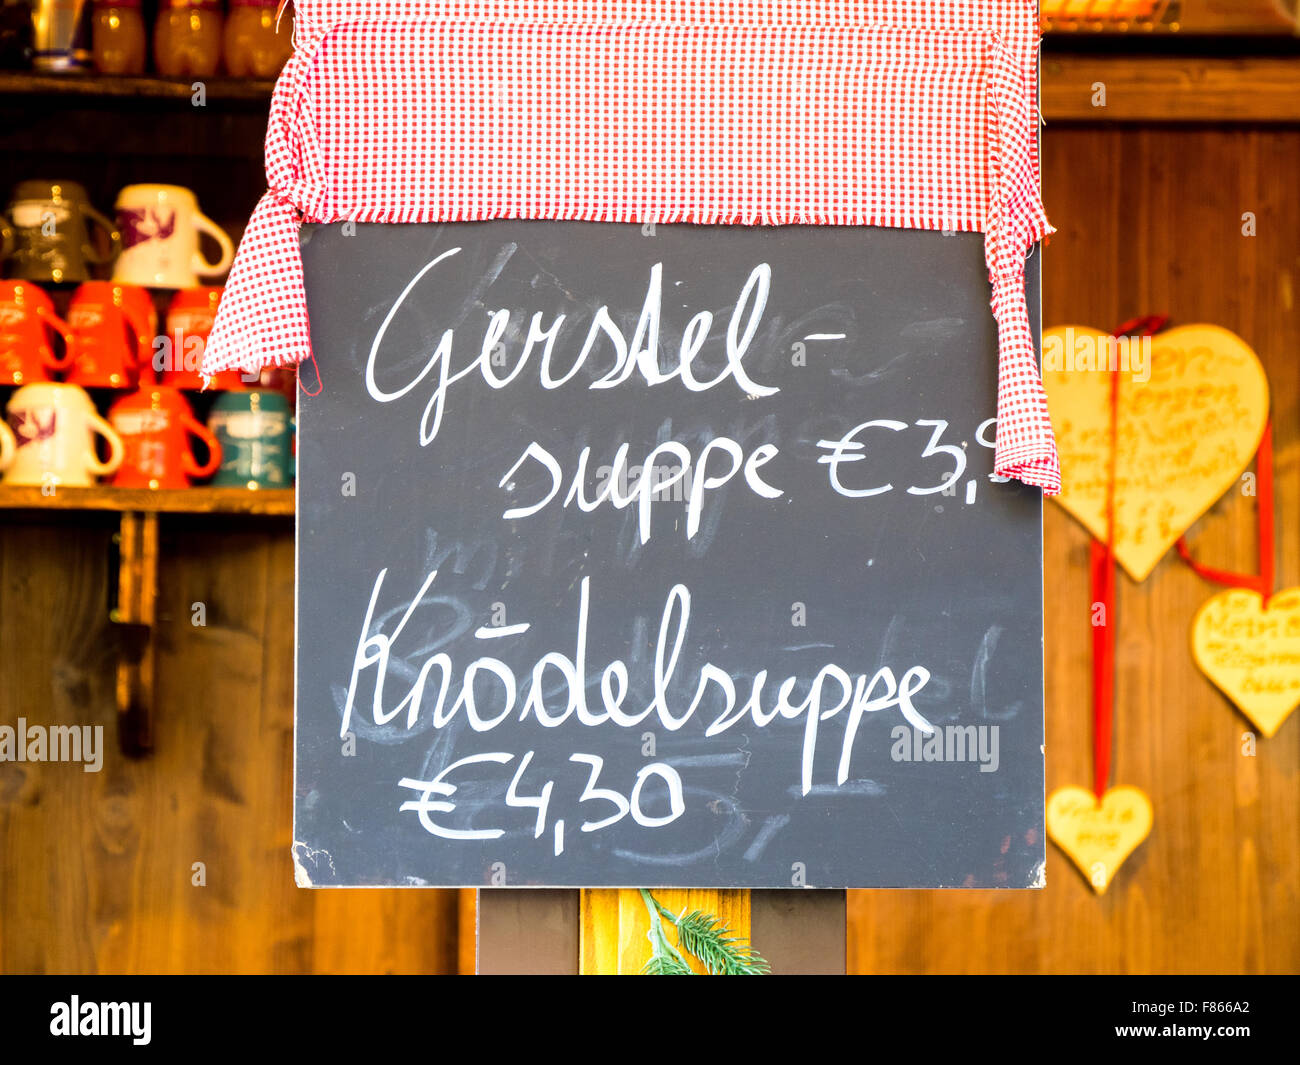 Hot food being sold at a Christmas market in Innsbruck, Austria. Chalk board hand written menu with items and prices listed. Stock Photo